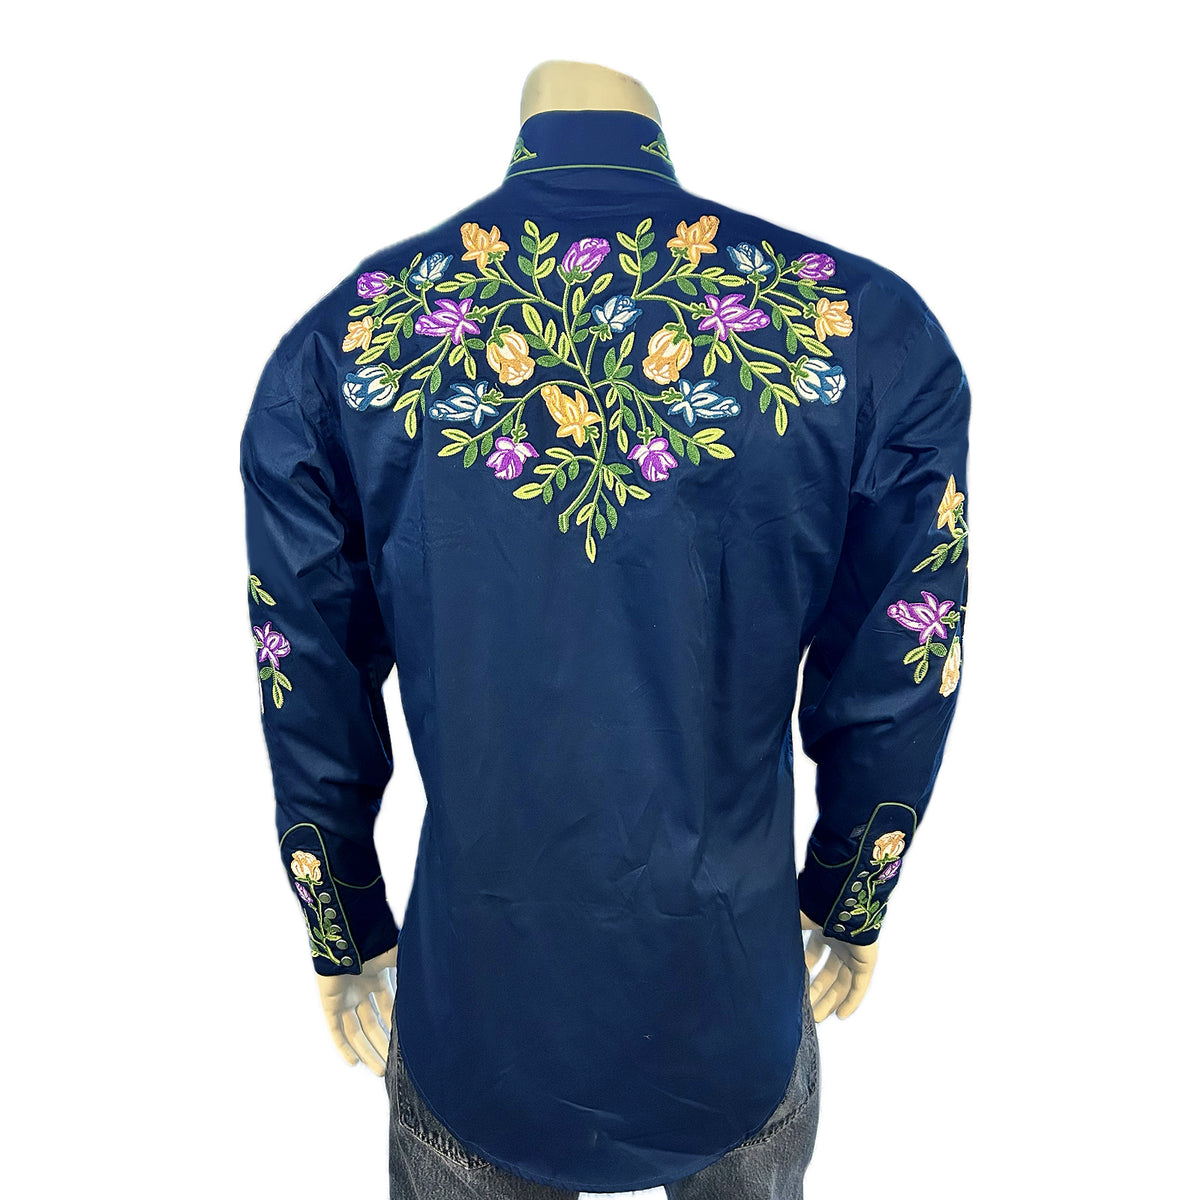 Women's Vintage Navy Floral Embroidered Western Shirt